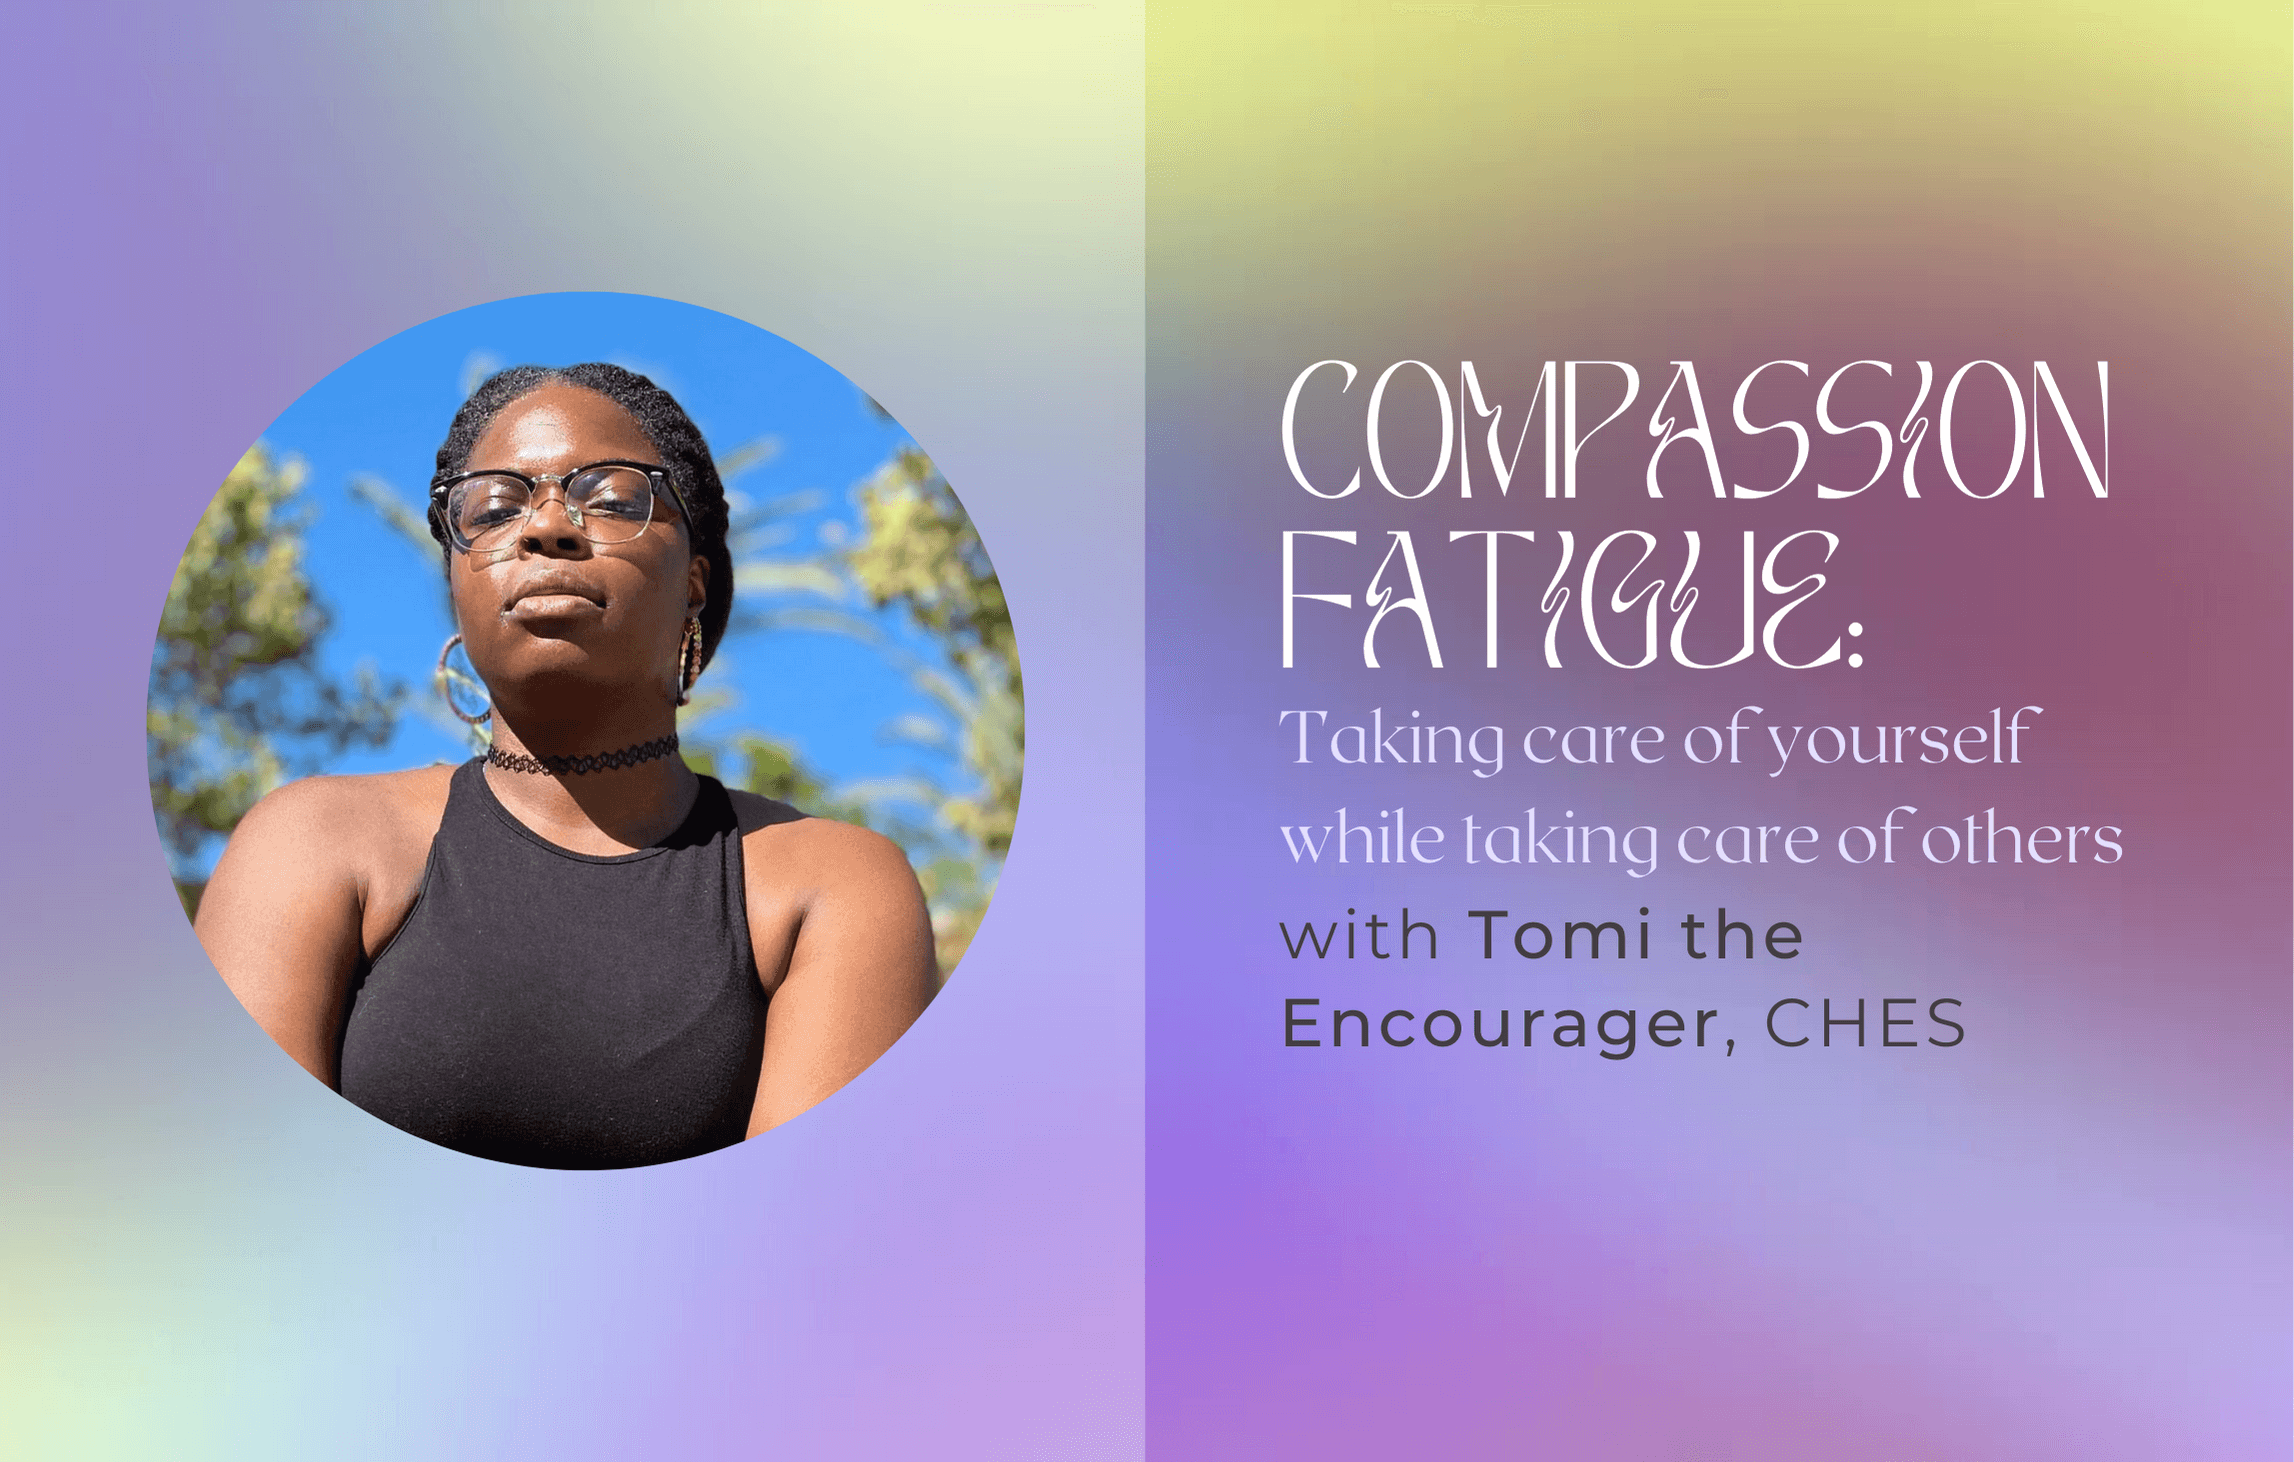 Compassion Fatigue: Taking Care of Yourself While Taking Care of Others